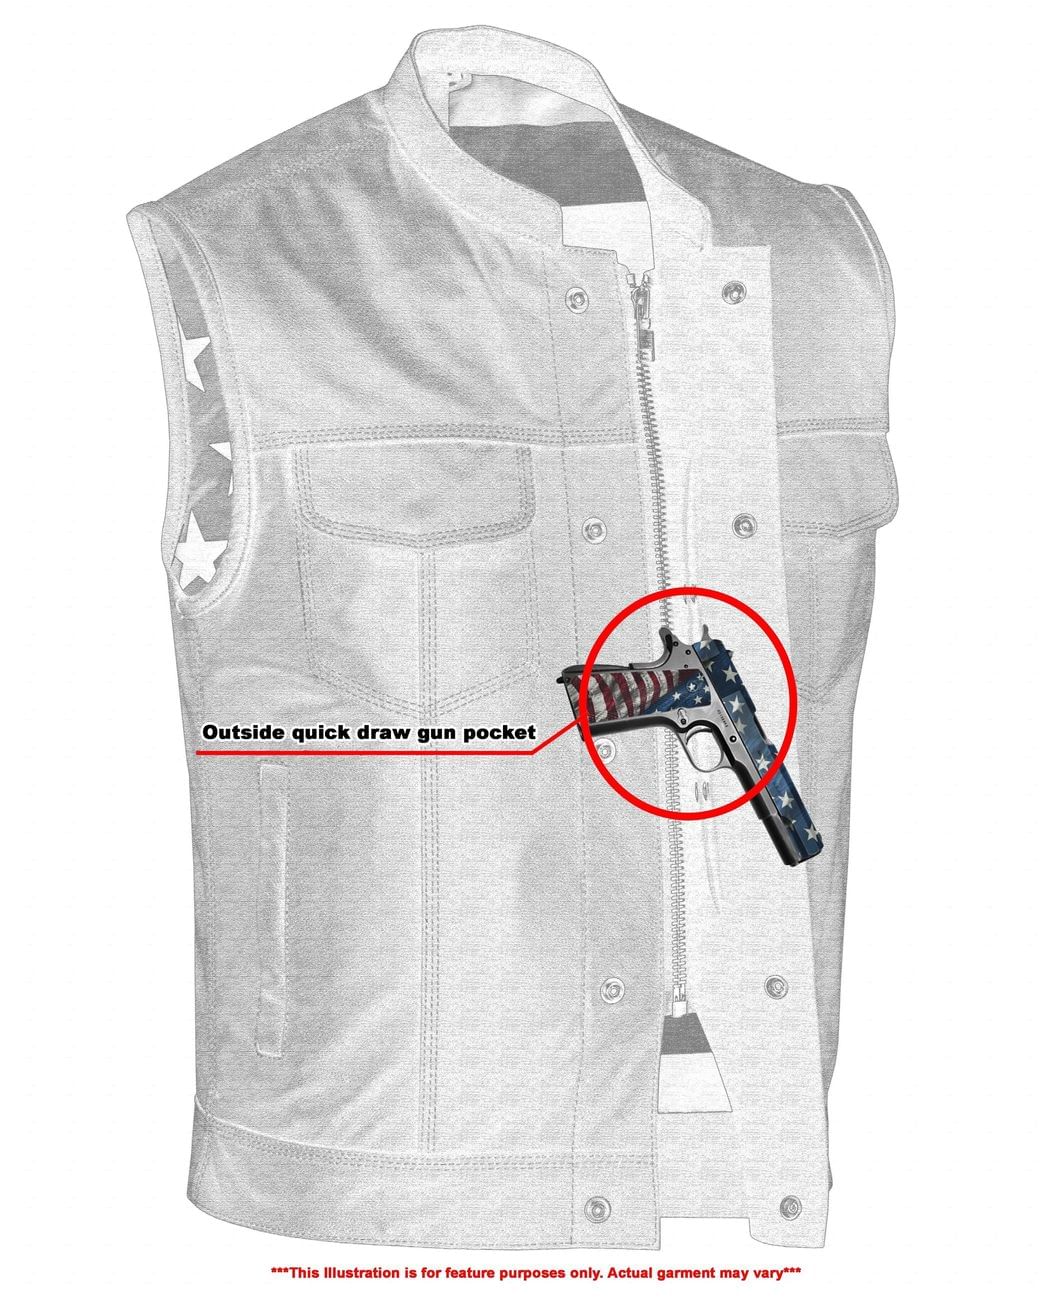 DS165 MEN’S LEATHER VEST WITH RED STITCHING AND USA INSIDE FLAG LINING WITH SCOOP COLLAR